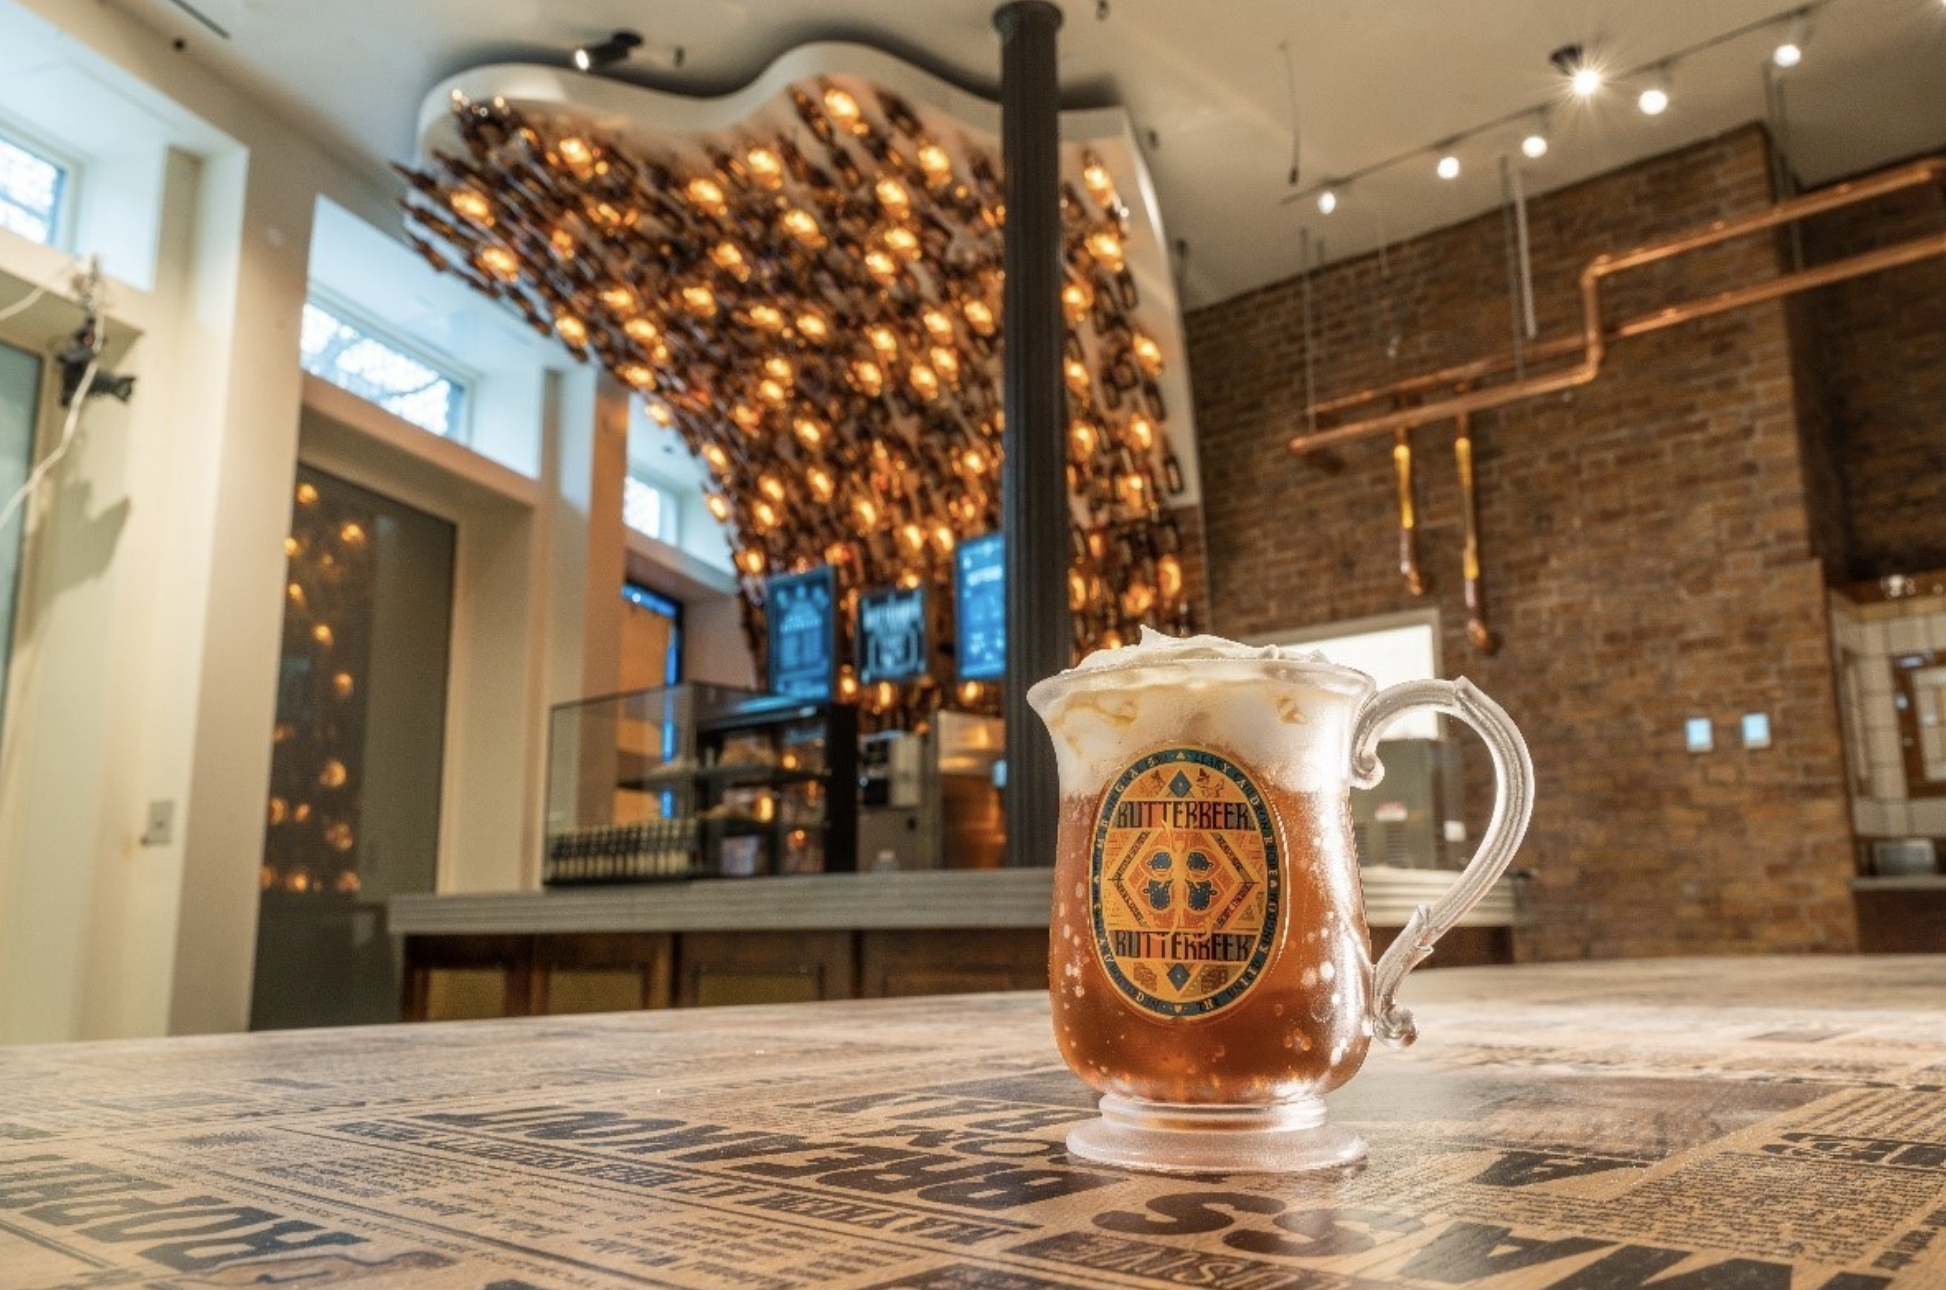 Harry Potter Butterbeer bar coming to NYC: What you need to know